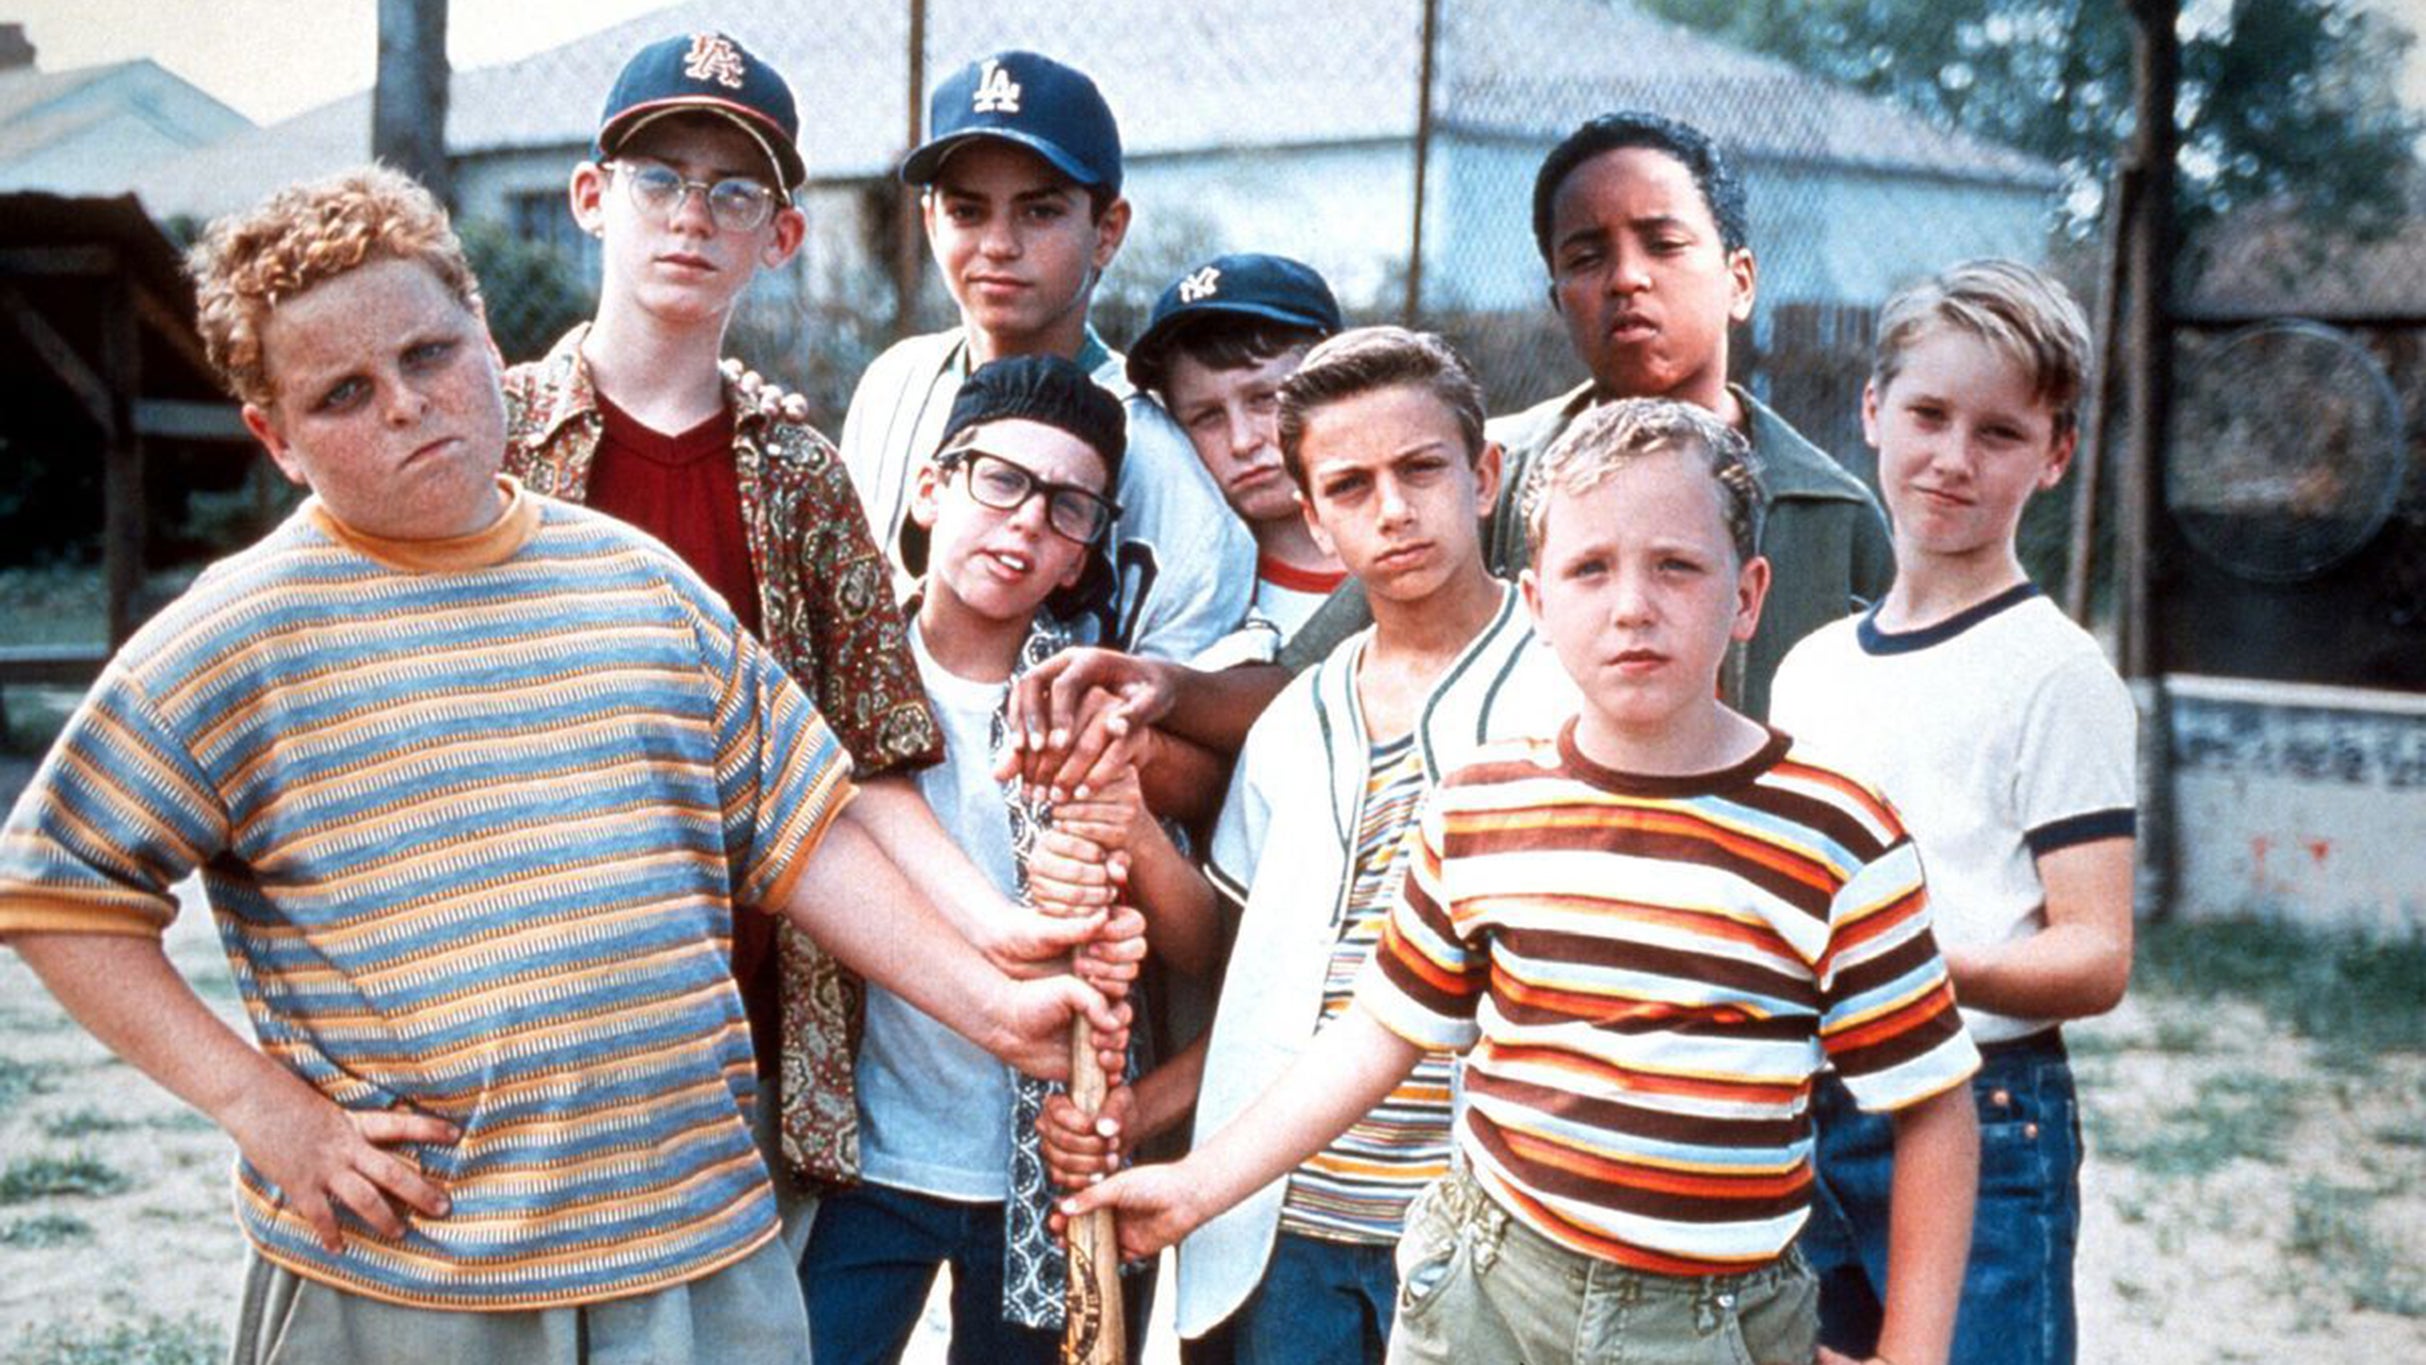 The Sandlot 30th Anniversary with the Cast in Riverside promo photo for Nuworlds presale offer code